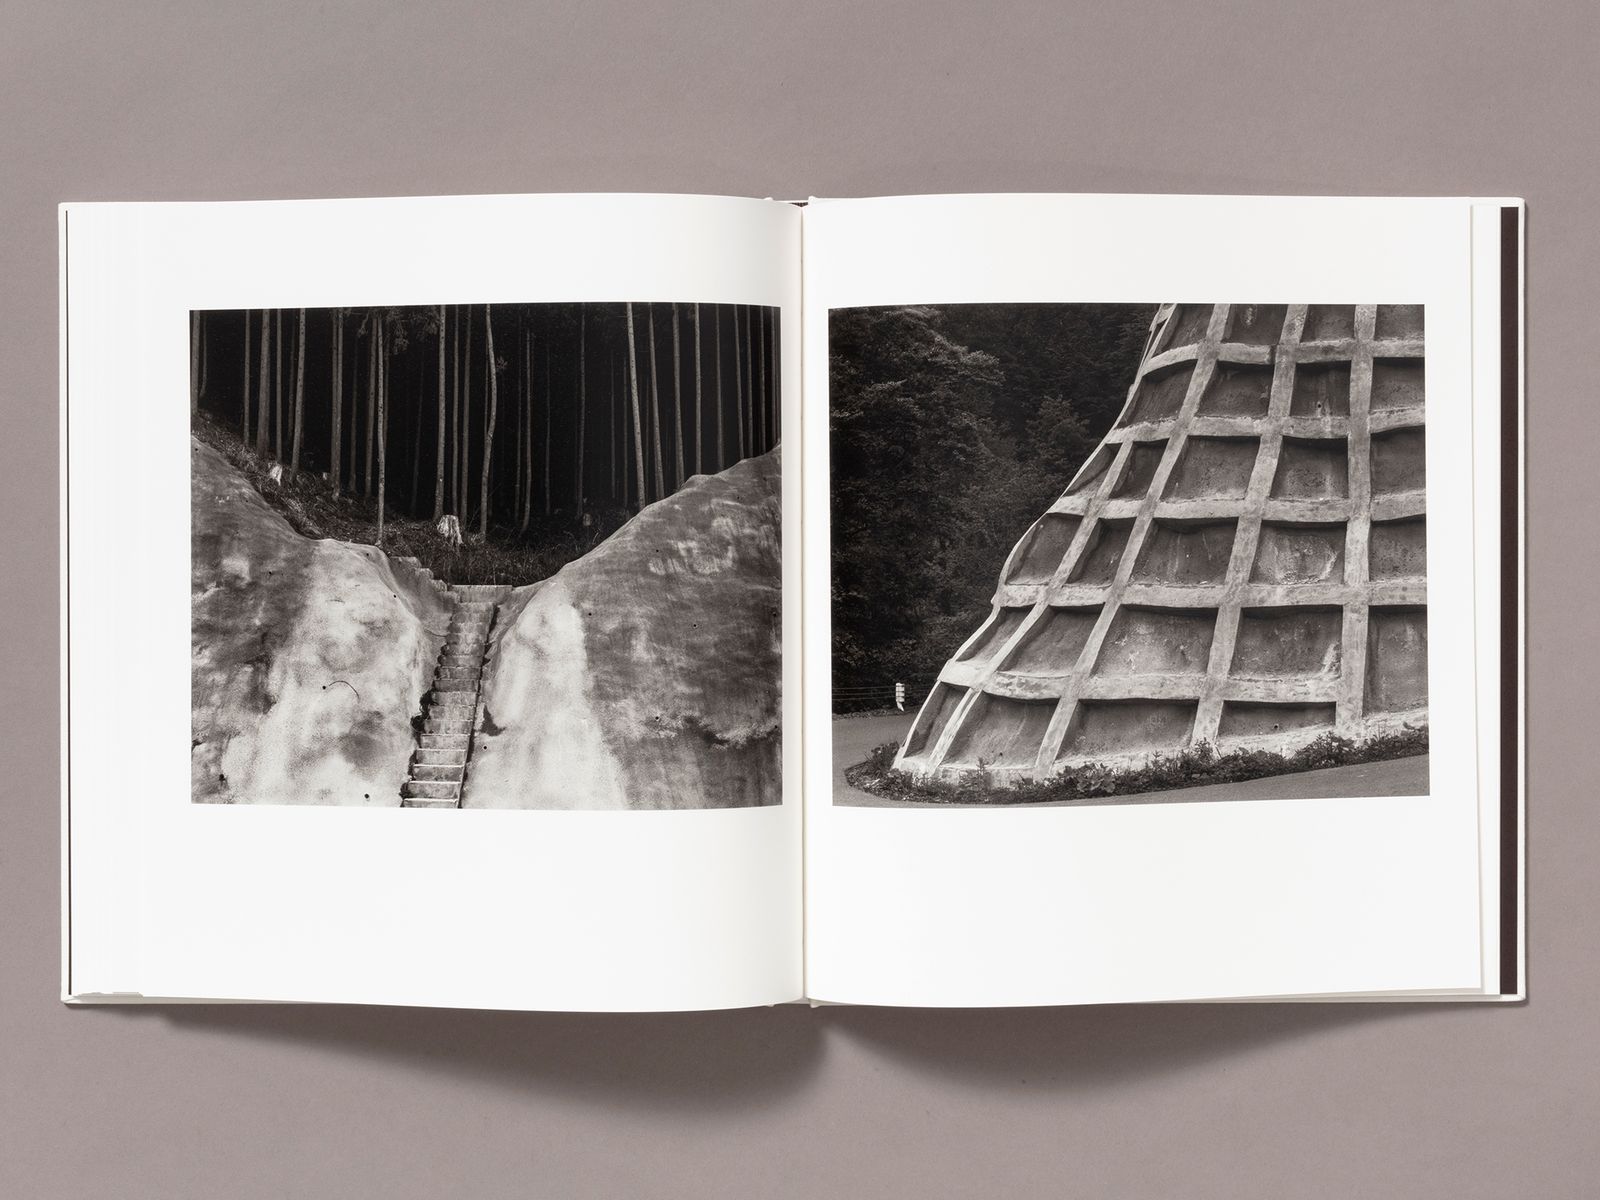 Photobook Review: Day for Night by Toshio Shibata